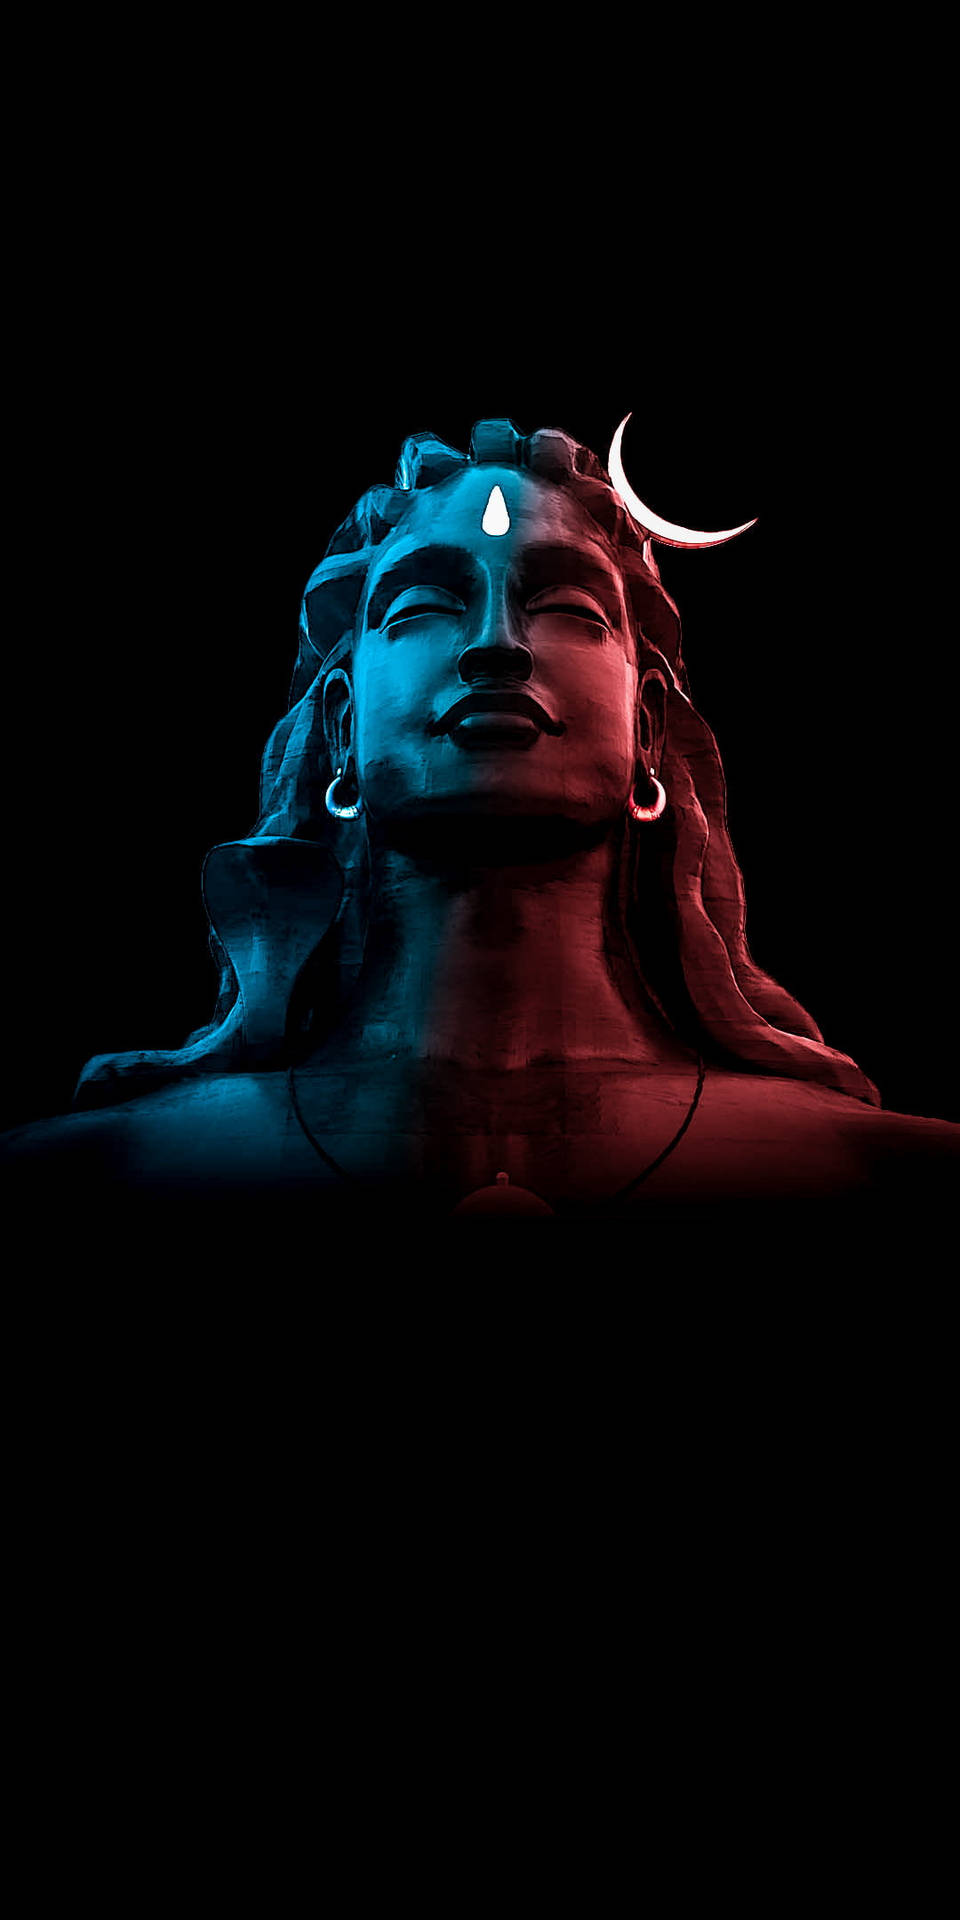  Lord Shiva Wallpapers Photos For iPhone  MyGodImages